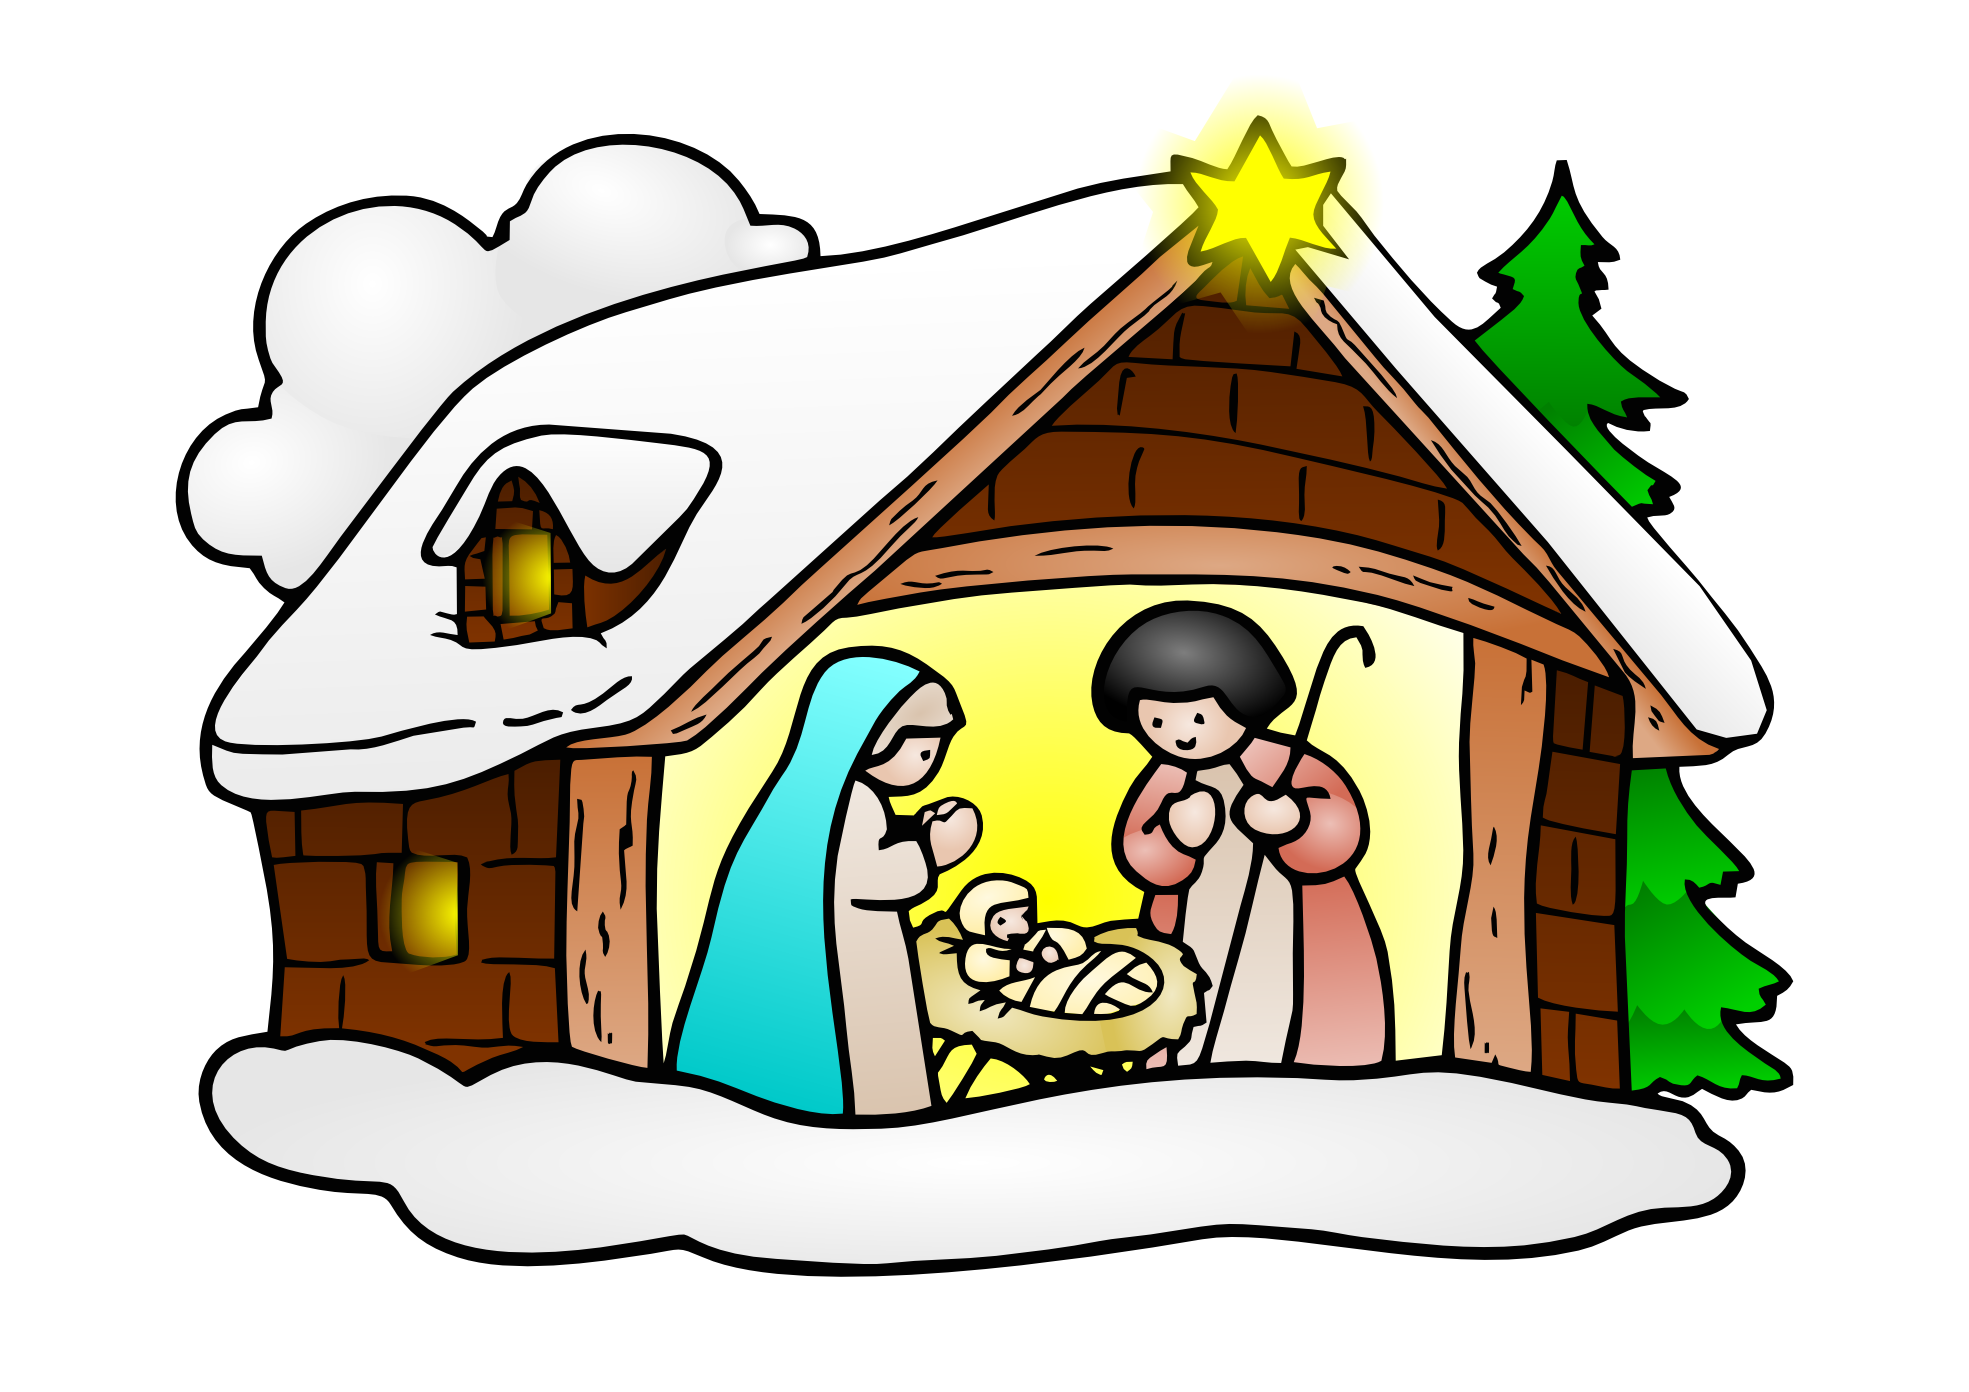 Xmas Stuff For > Christmas Nativity Images Free Clip Art